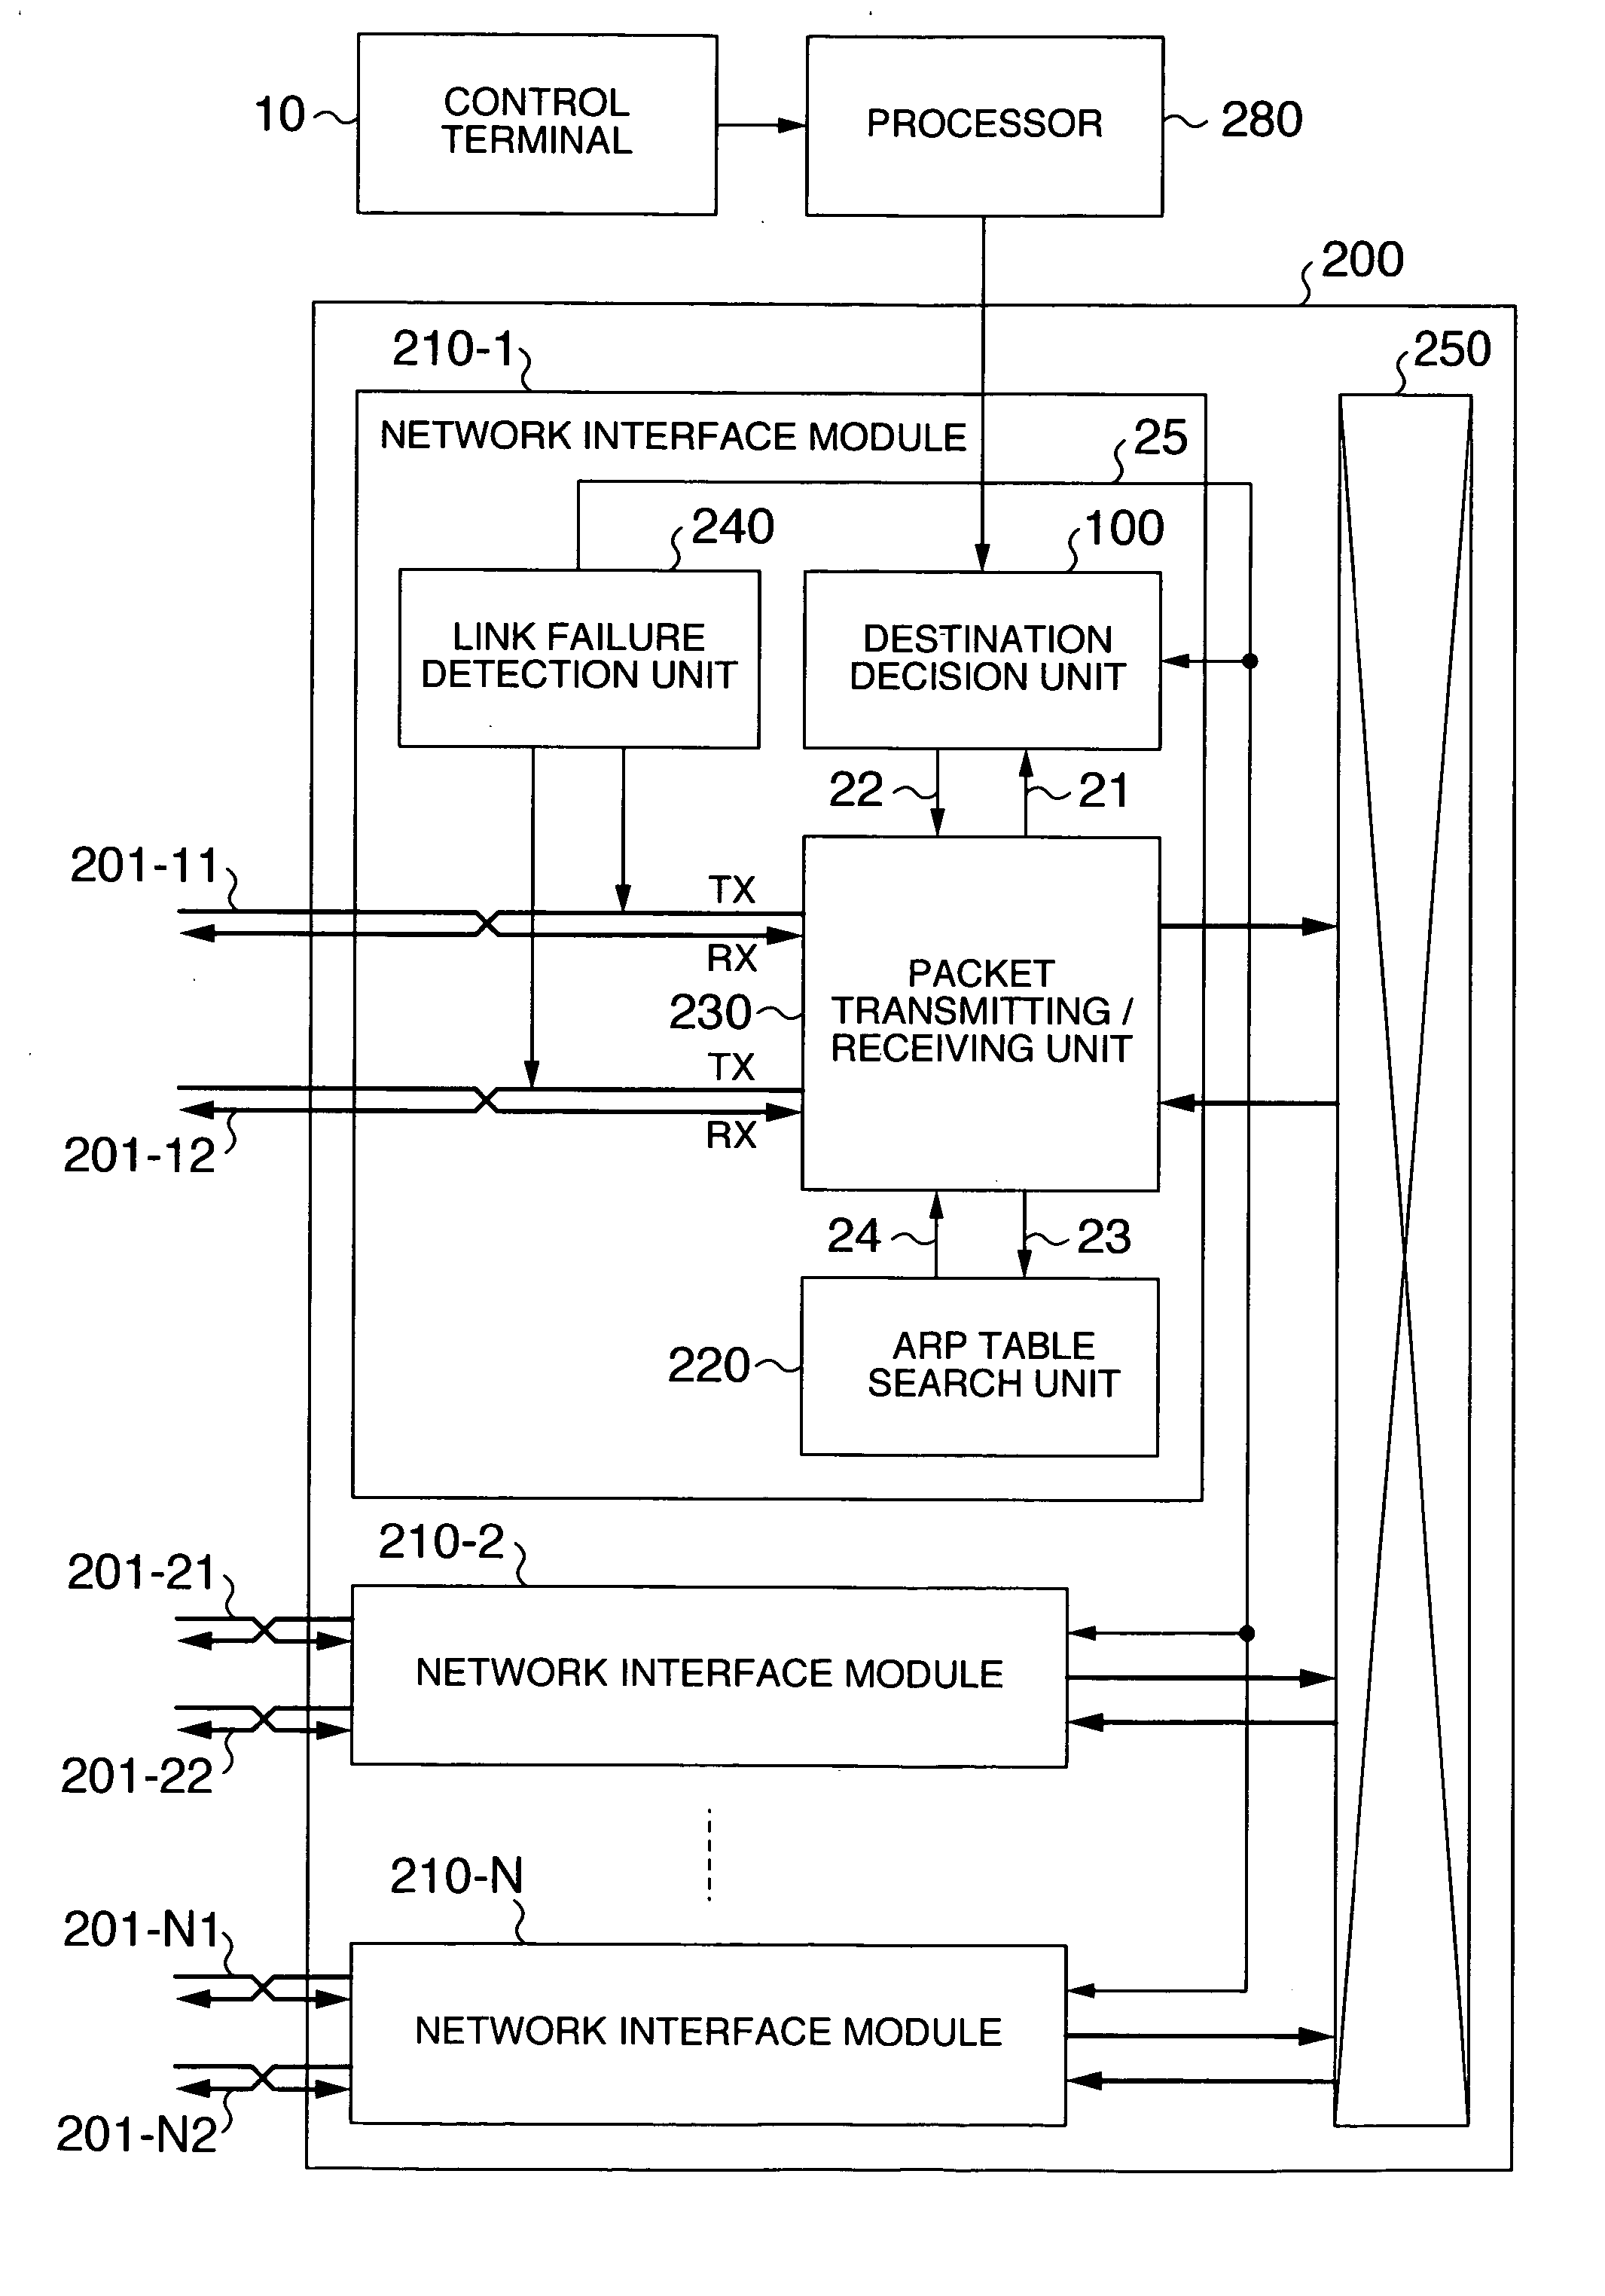 Packet forwarding apparatus with function of diverting traffic